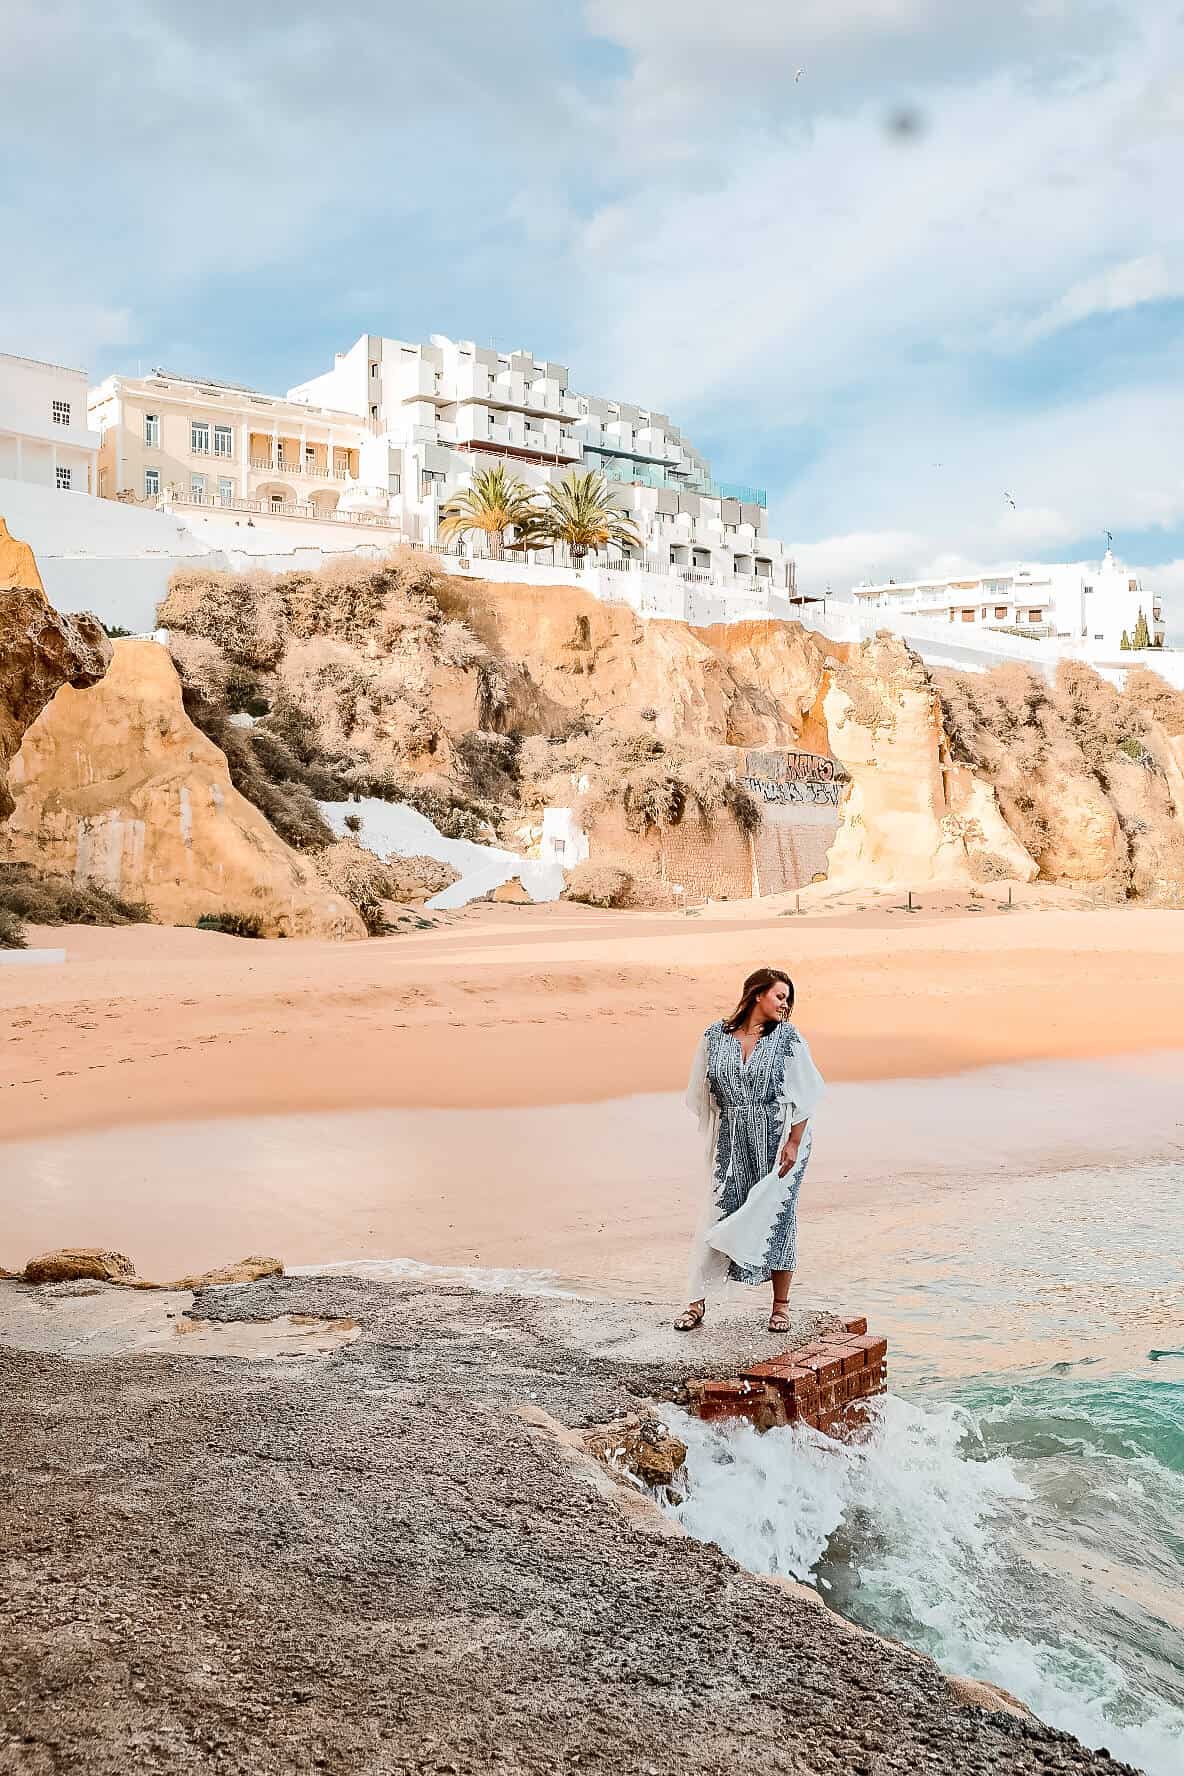 How to go to Albufeira From Faro? Standing on the beach of Albufeira.